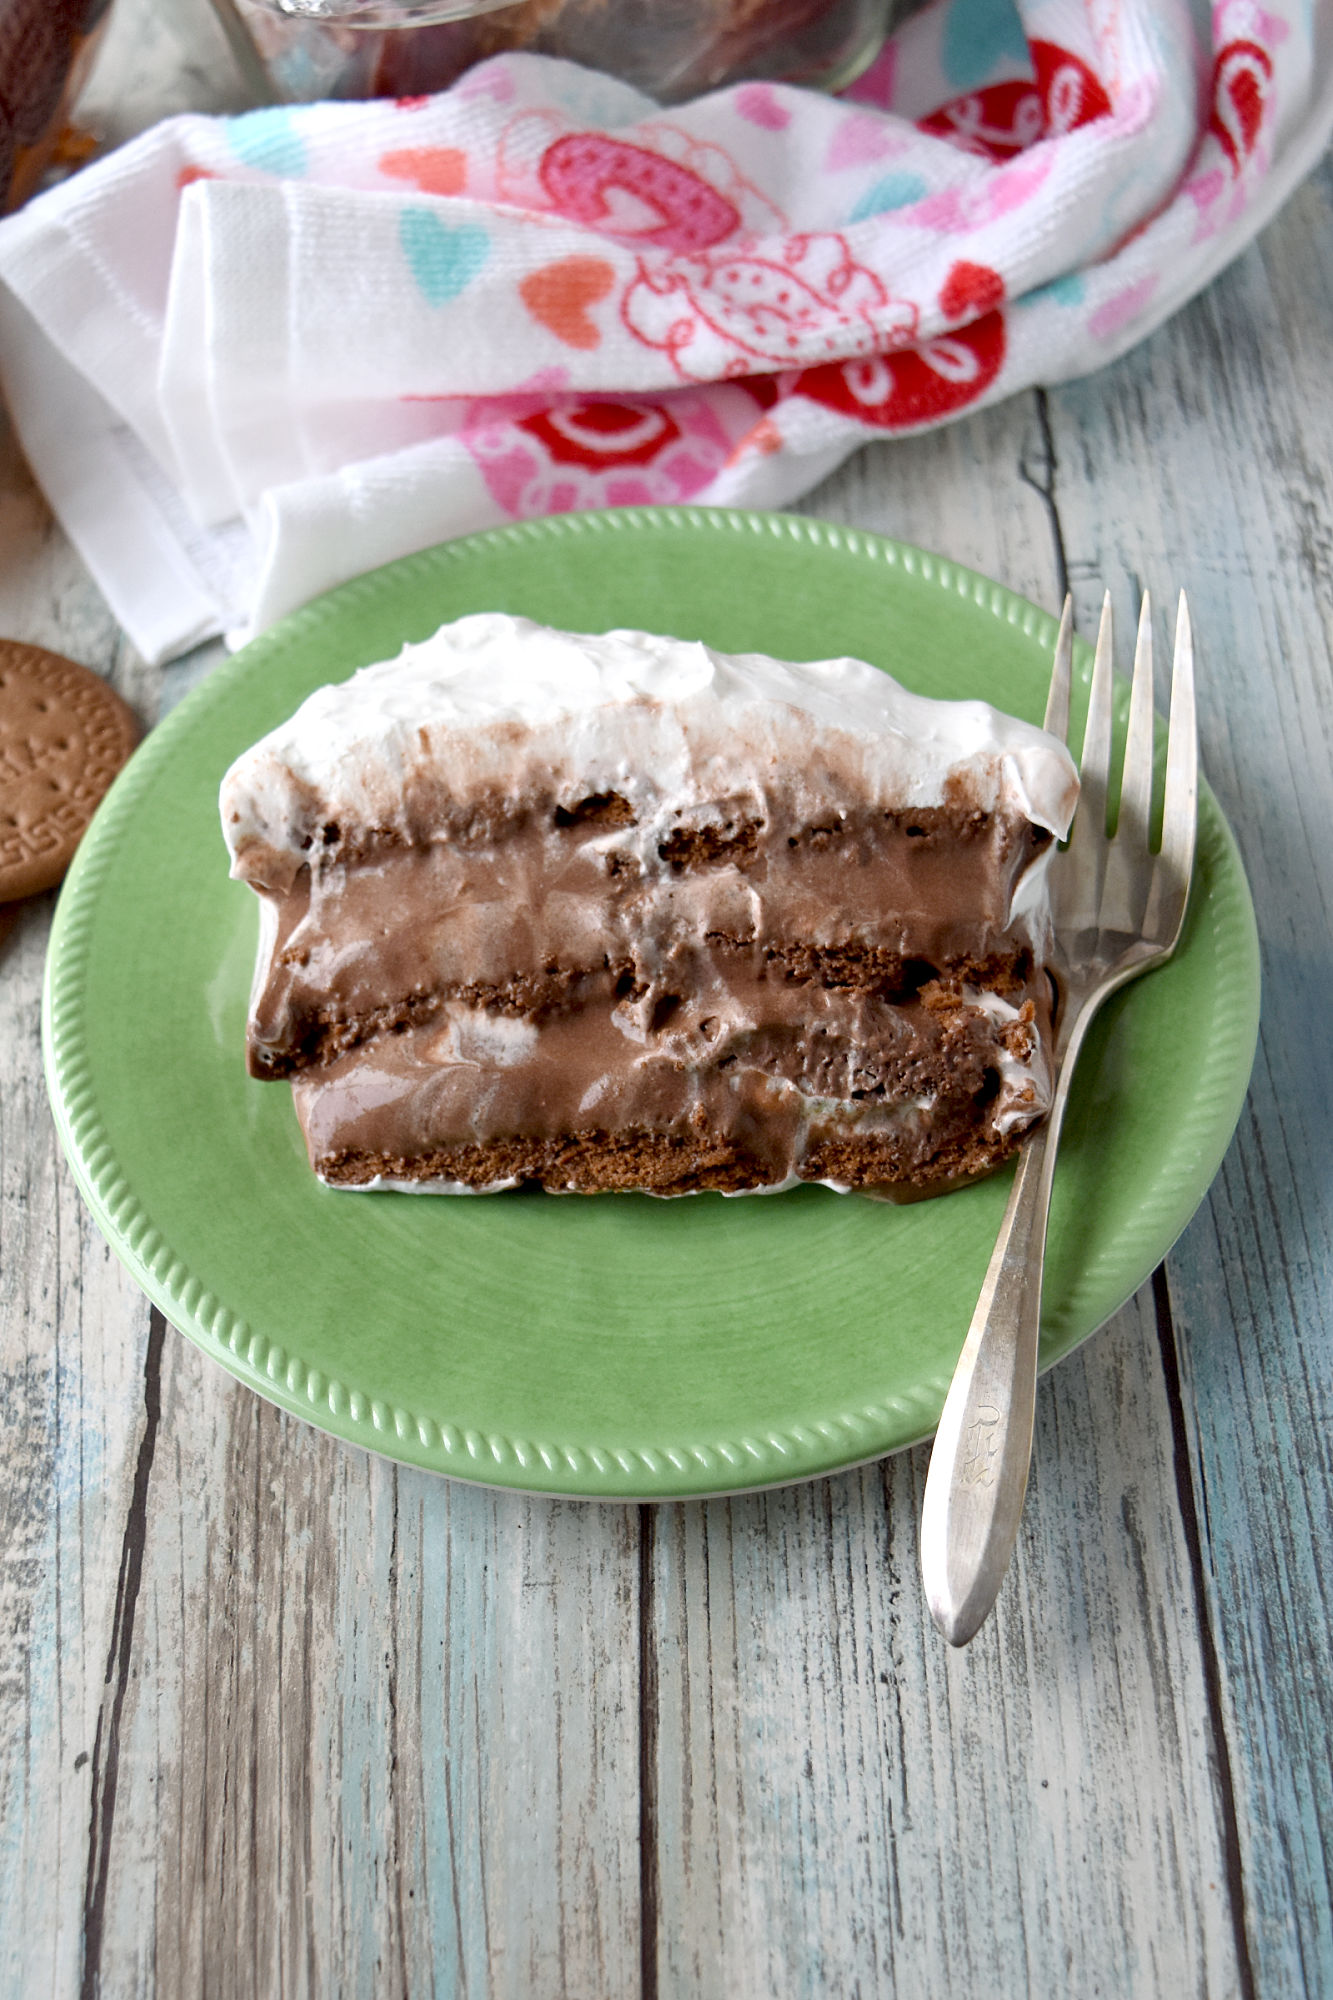 Icebox Mocha Cake is easy to assemble with simple ingredients. The chocolate cookies absorb all the flavors of the pudding and make for rich layers. #ChocolateWeek